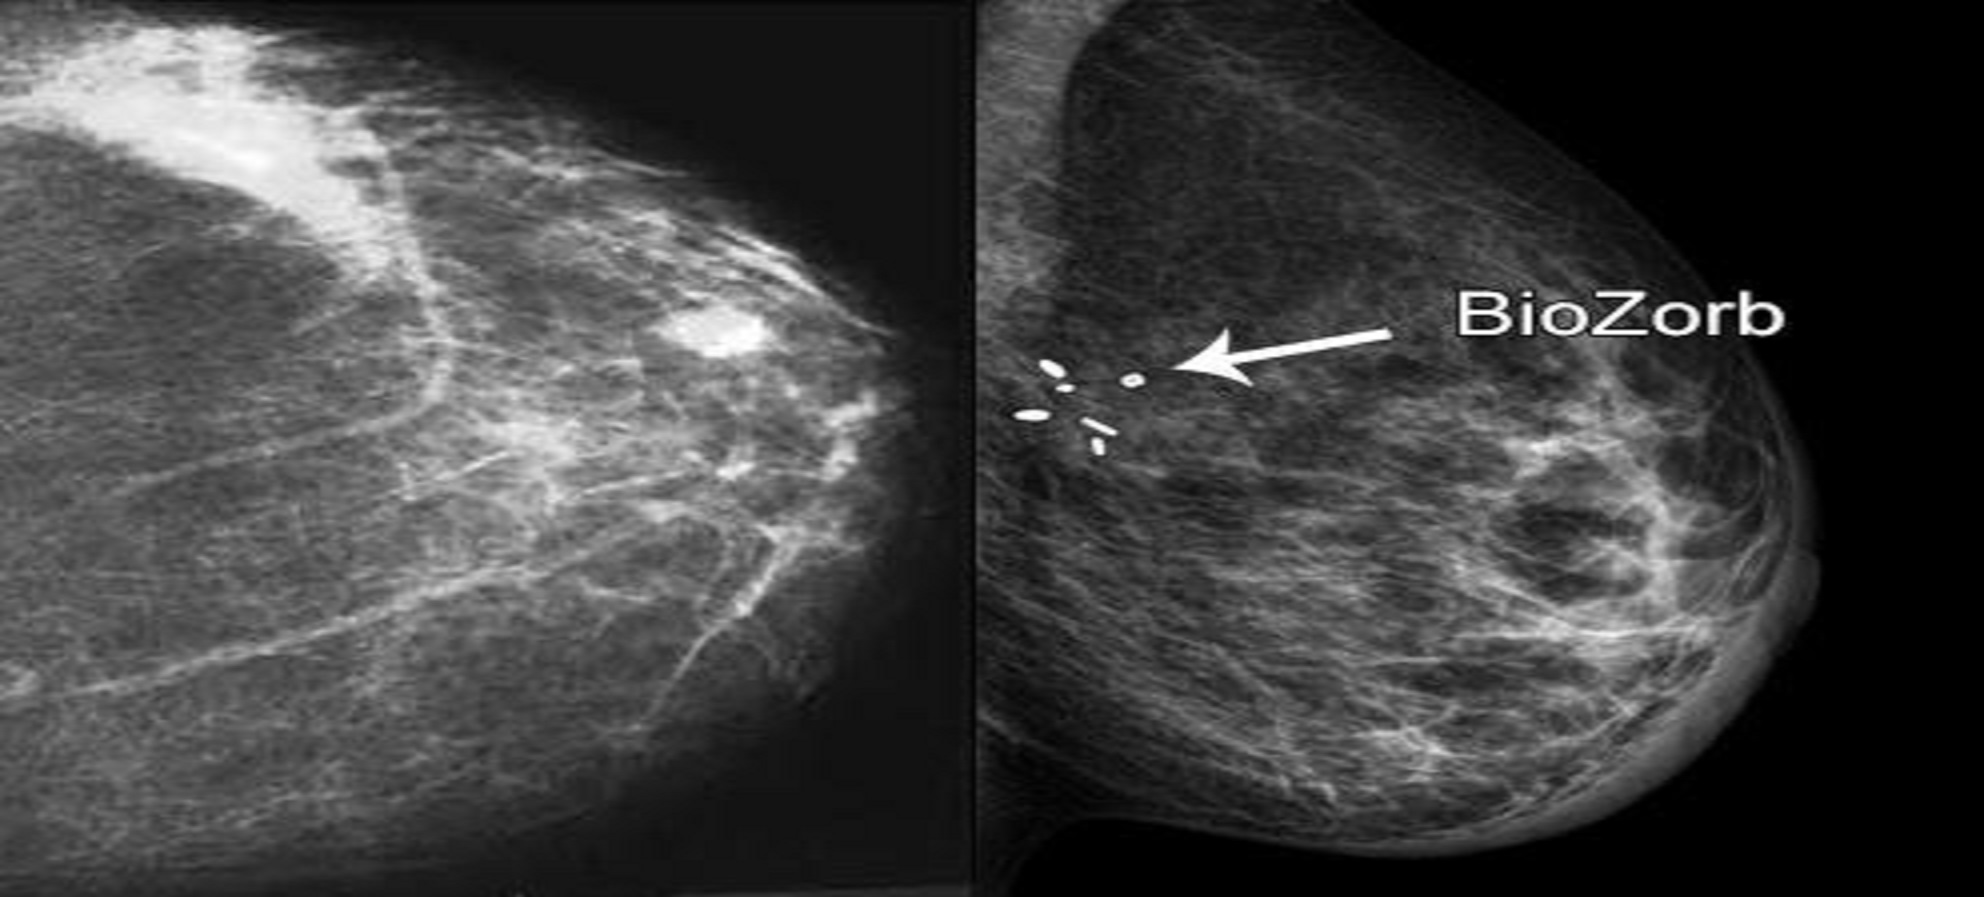 A Feasible Novel Technique for Breast Cancer Imaging Using UWB-Microwave Antennas